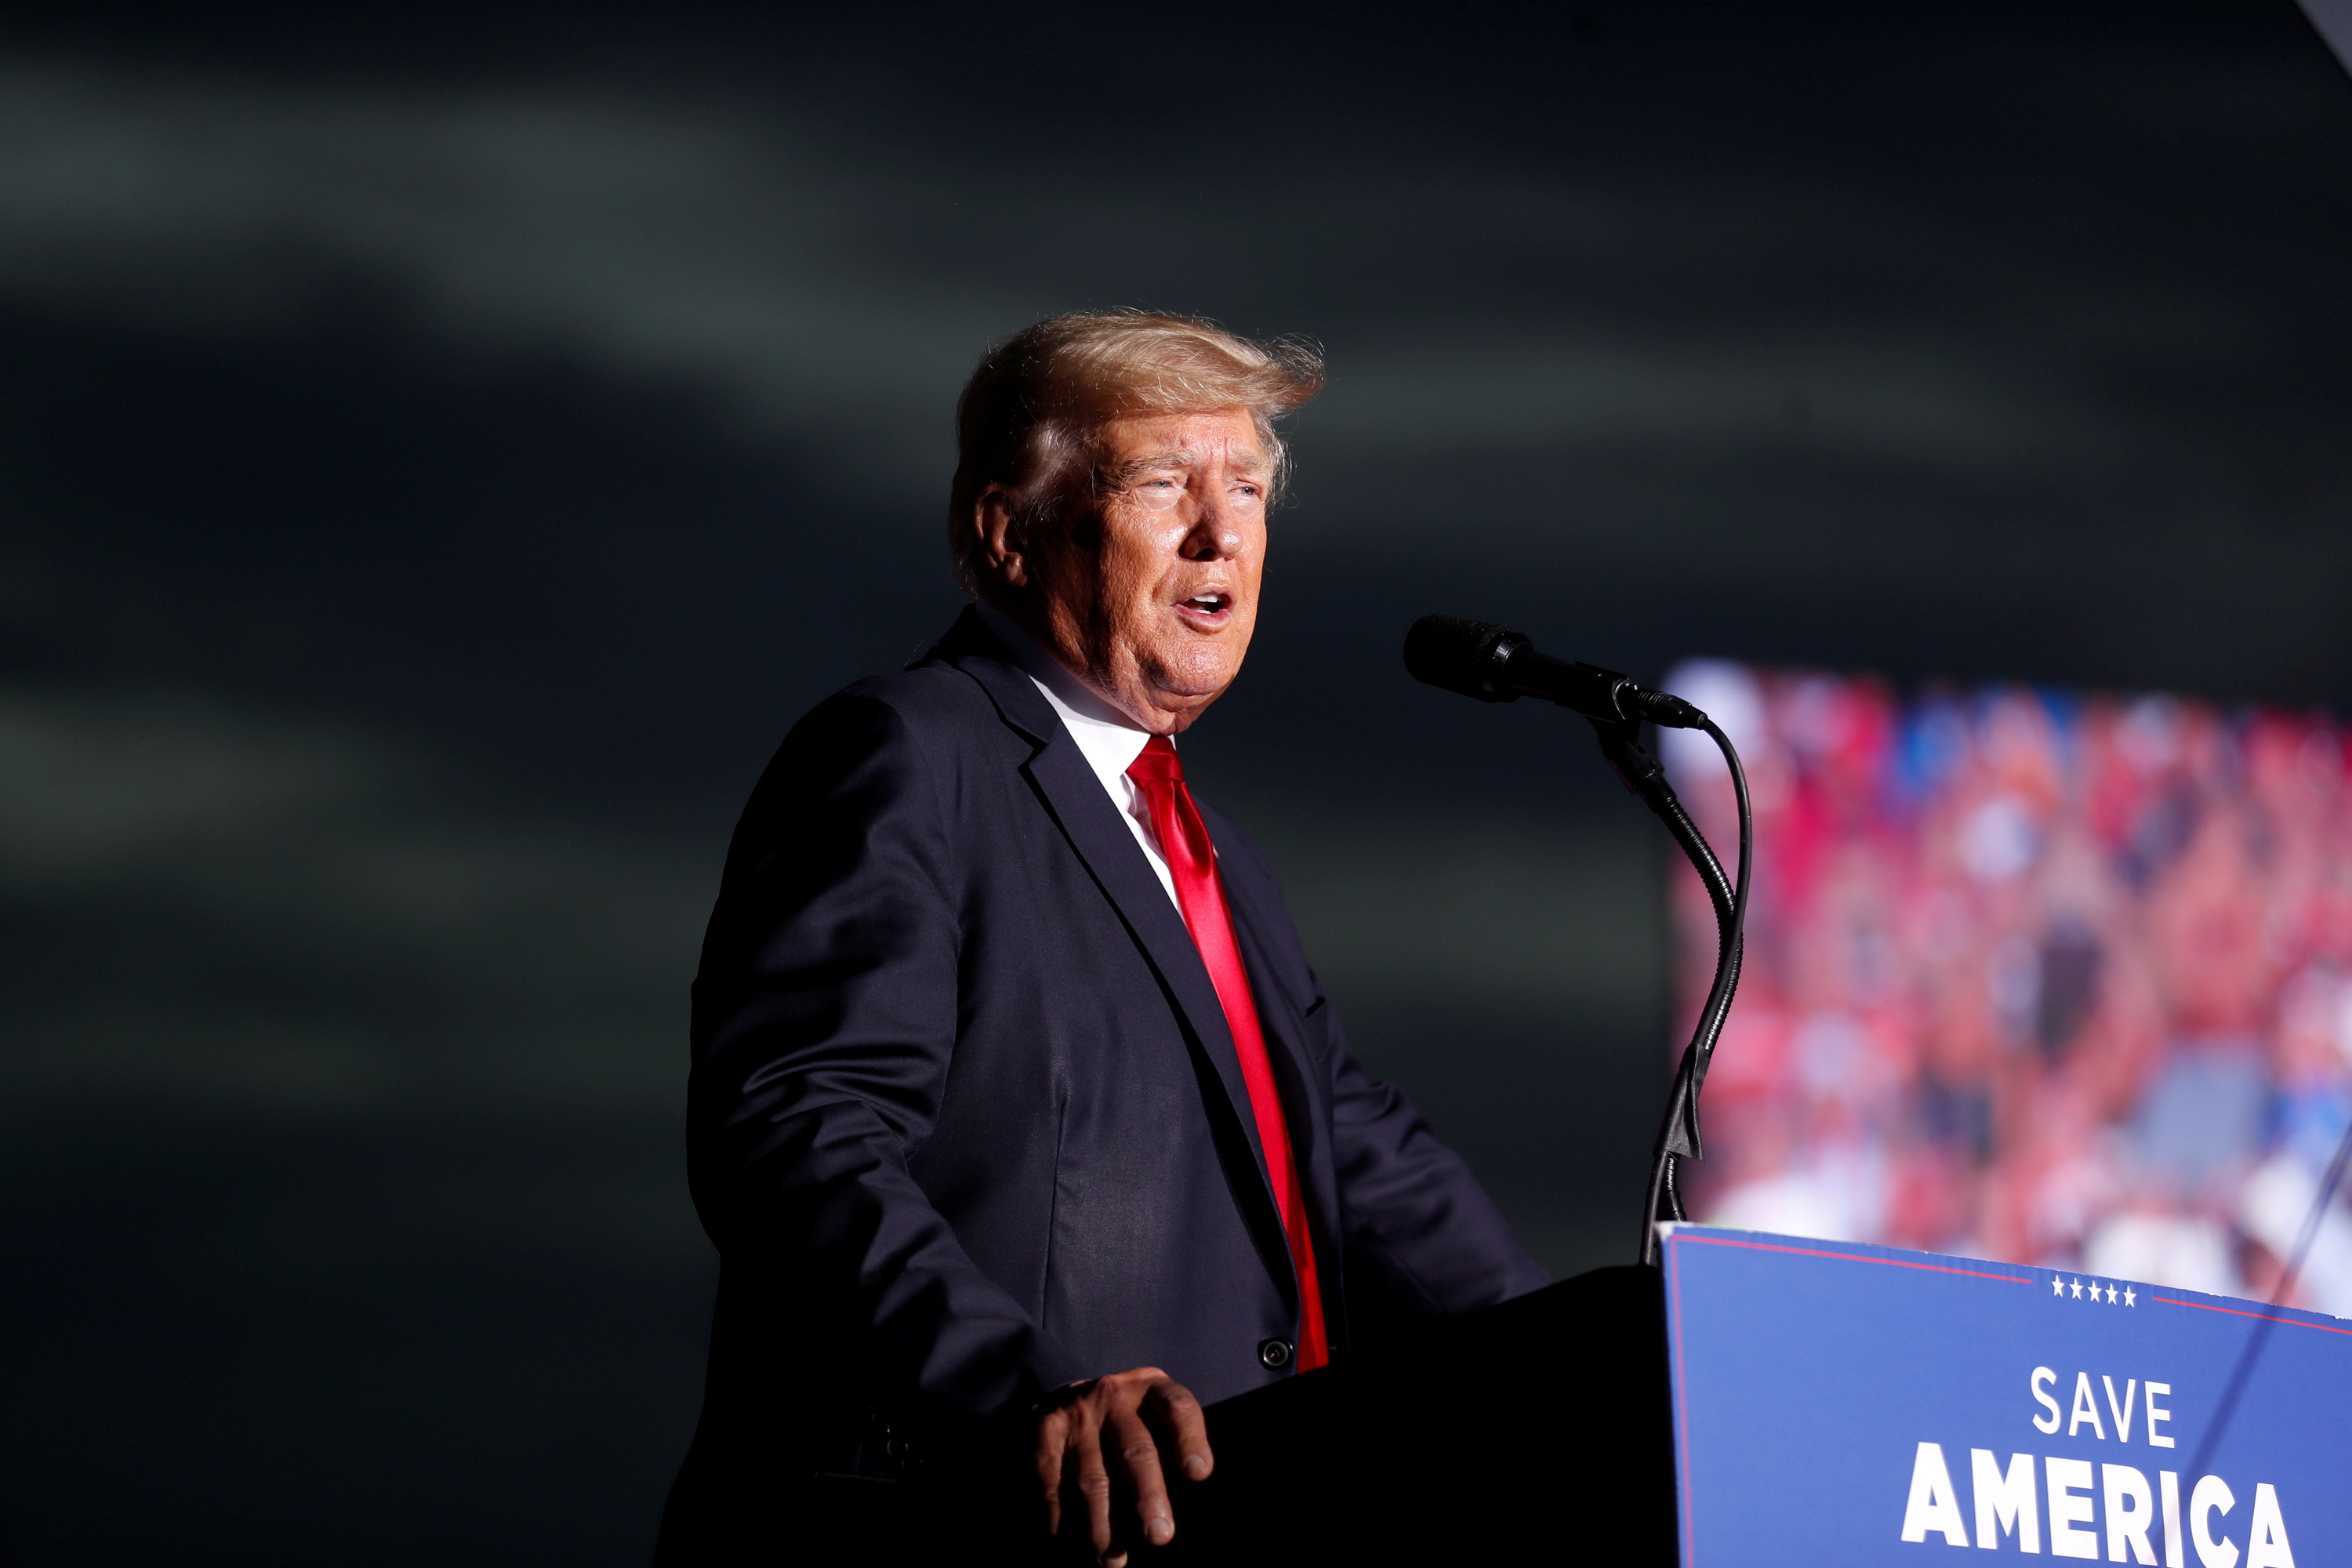 Former President Donald Trump speaks to his supporters during the Save America Rally at the Sarasota Fairgrounds in Sarasota, Florida, U.S. July 3, 2021. REUTERS/Octavio Jones